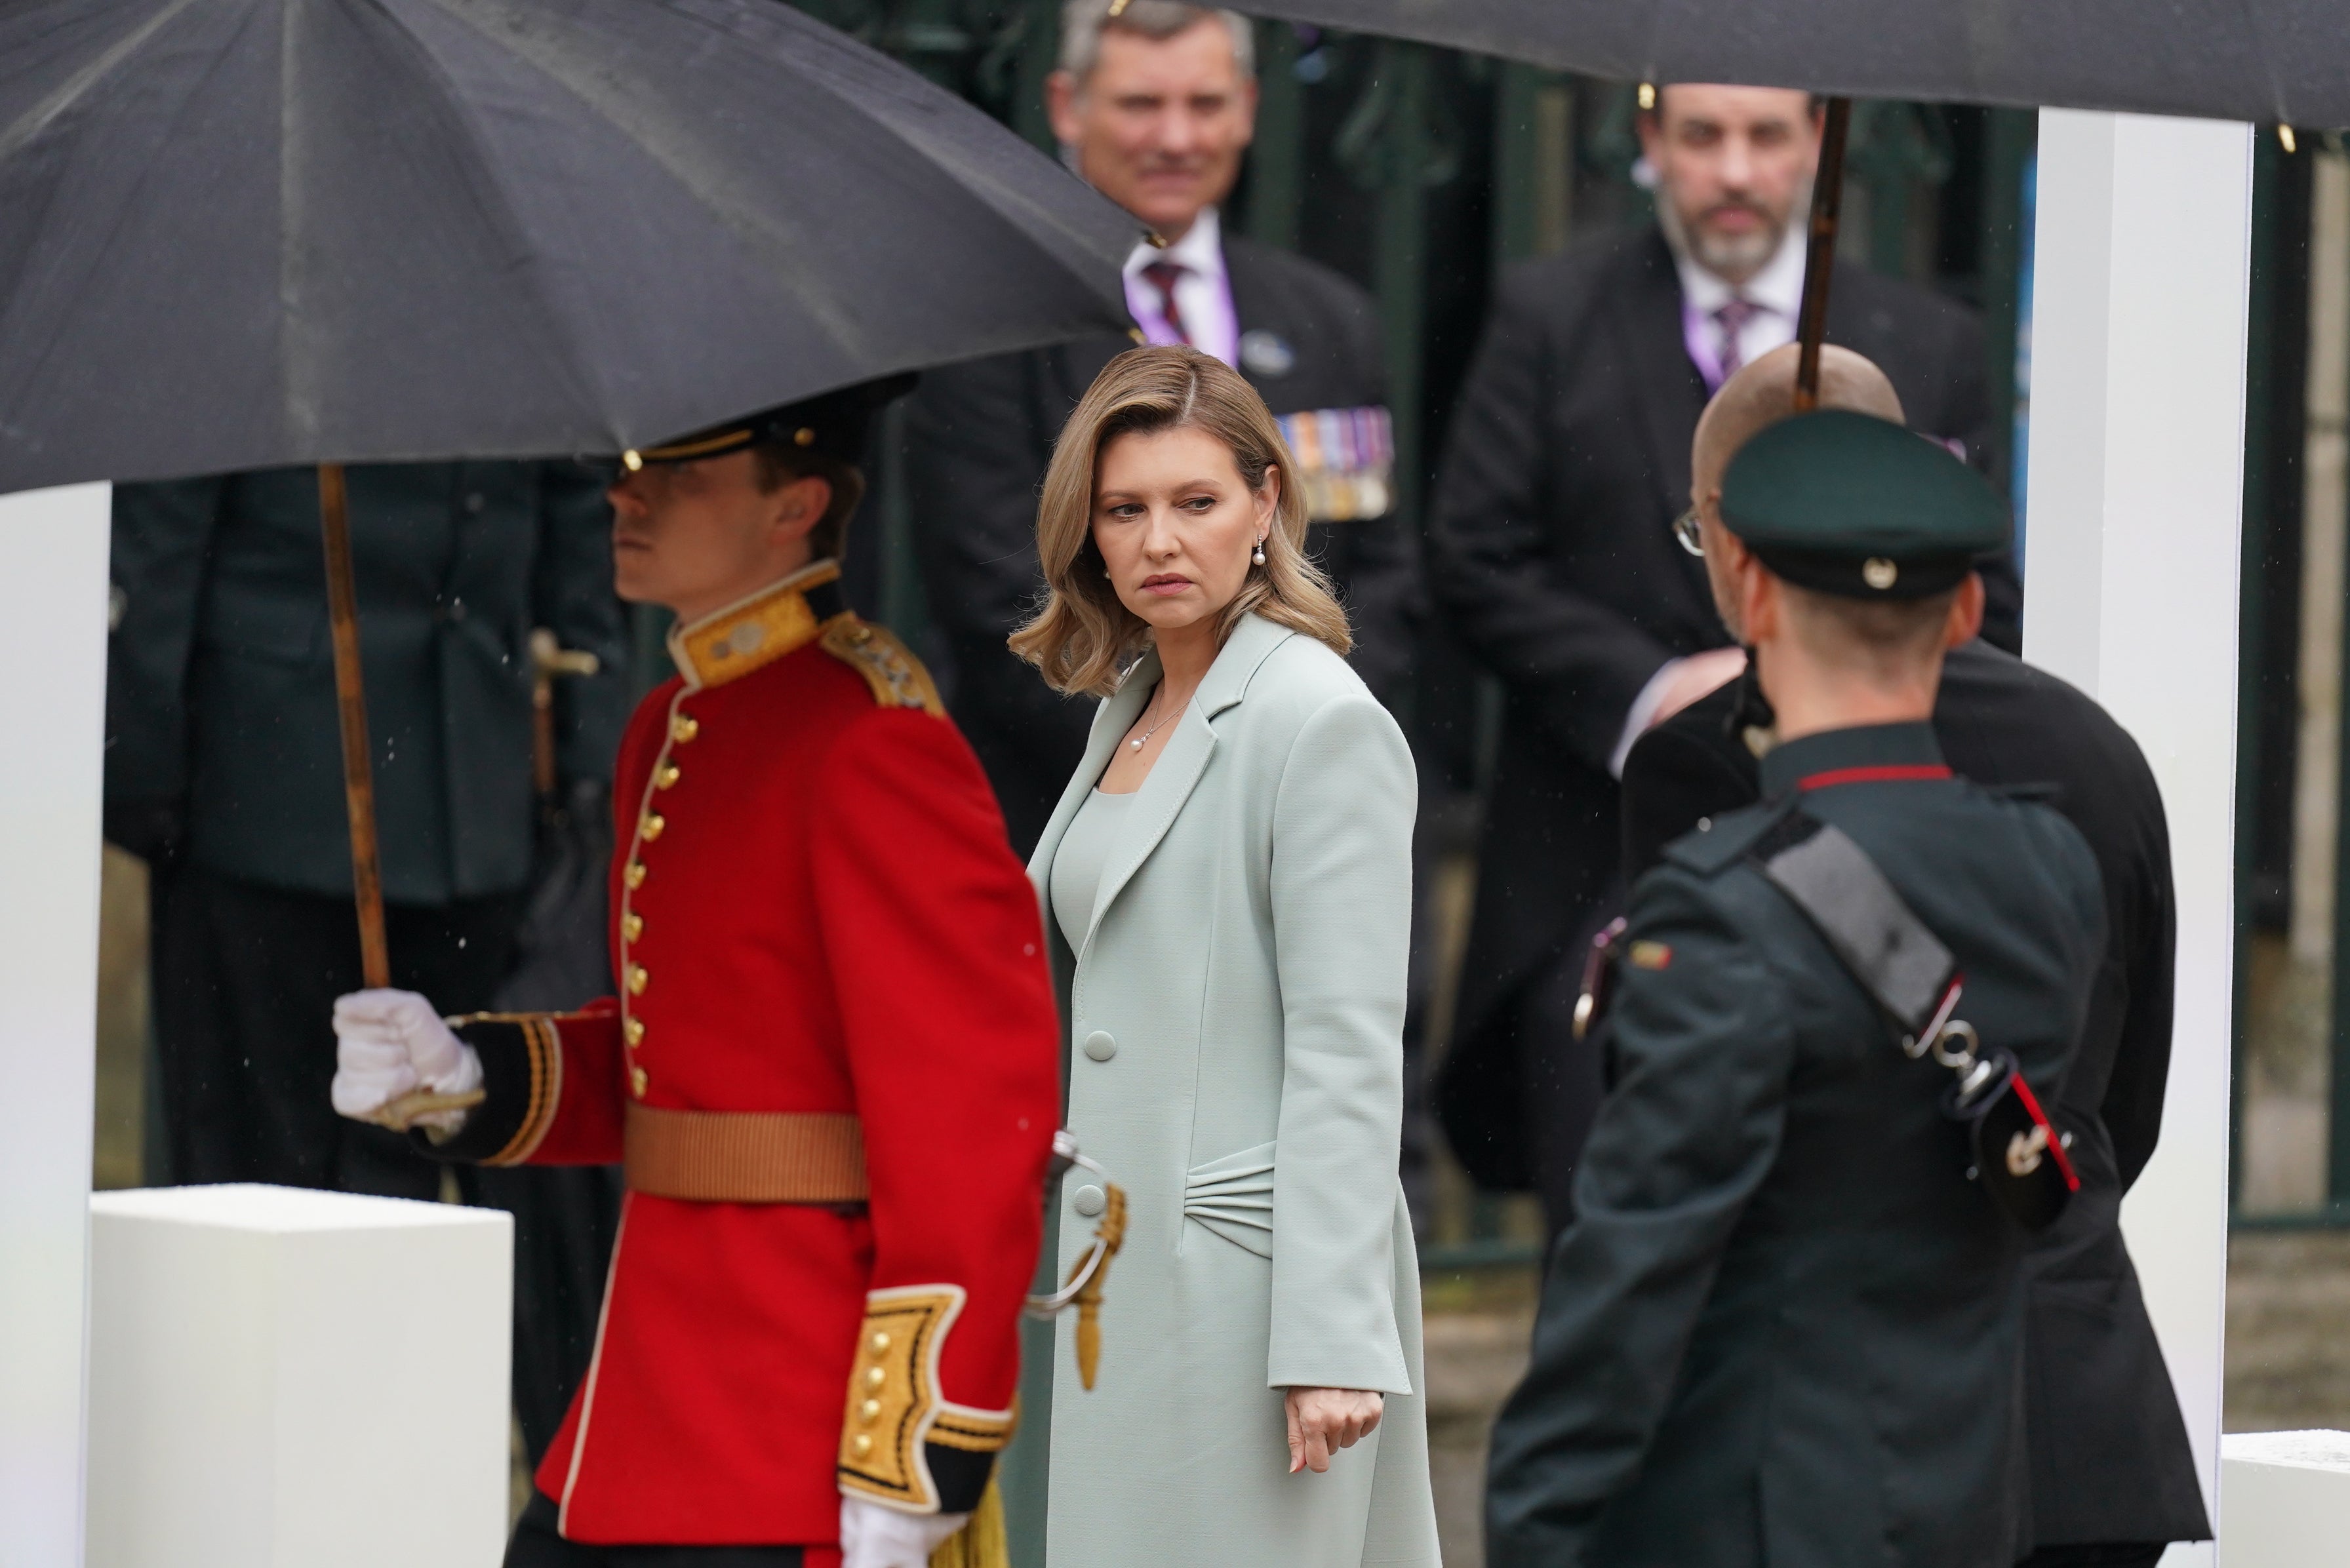 First Lady of Ukraine Olena Zelenska is also in attendance, but not her husband